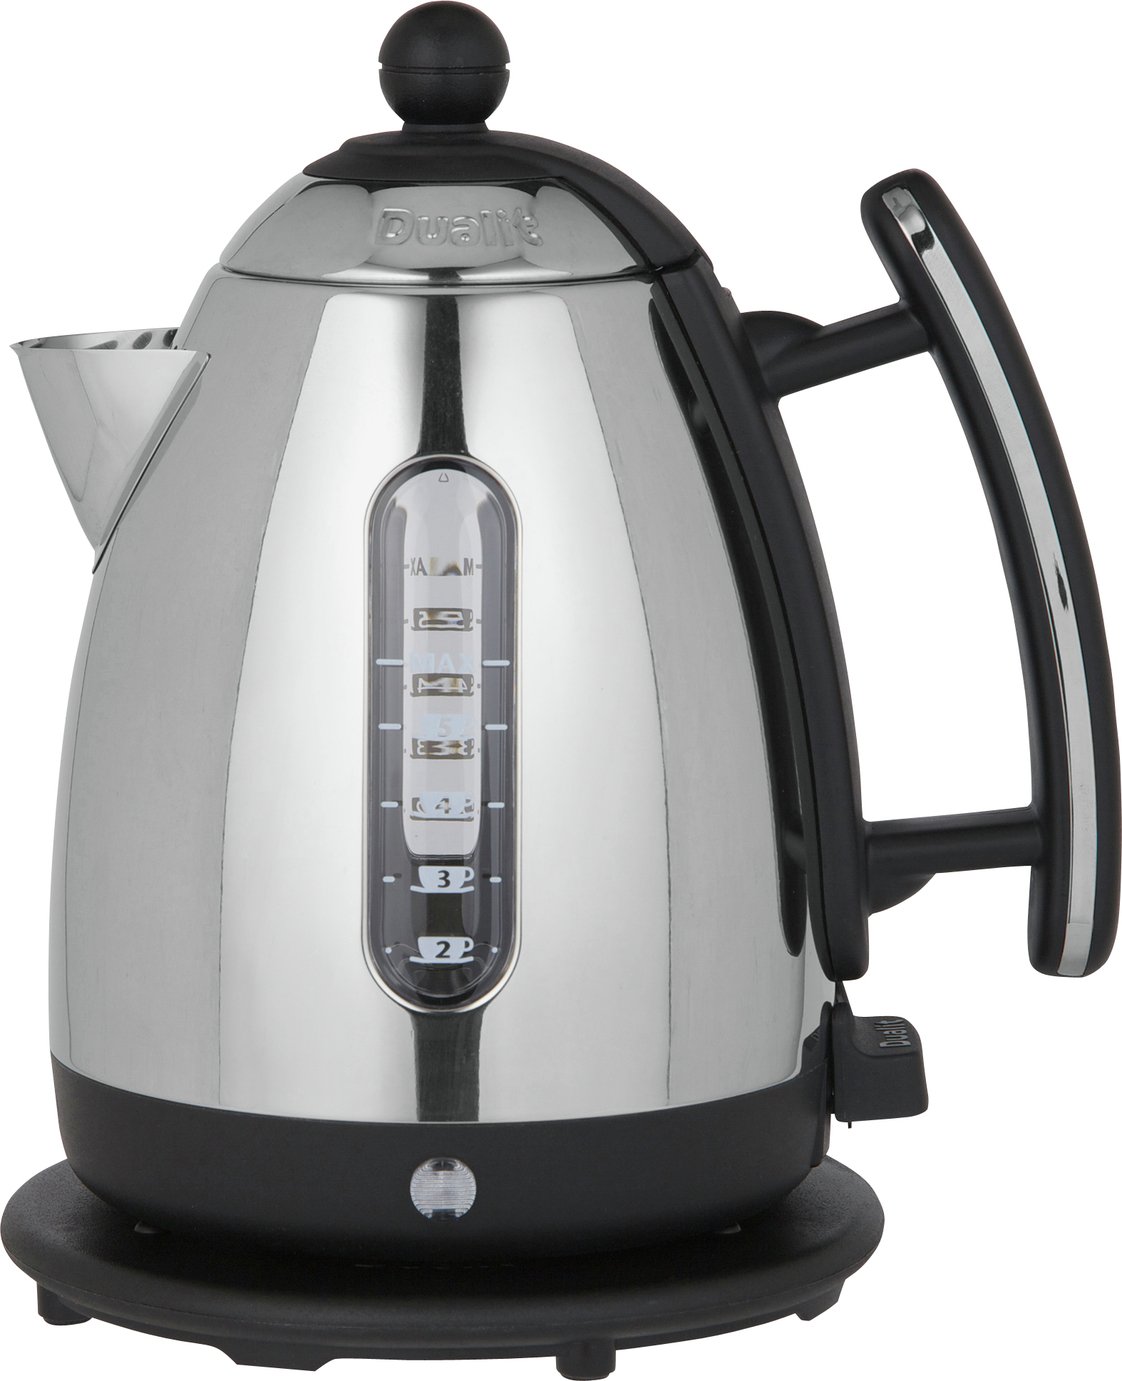 Dualit 72400 JKT3 Jug Kettle - Stainless Steel and Black